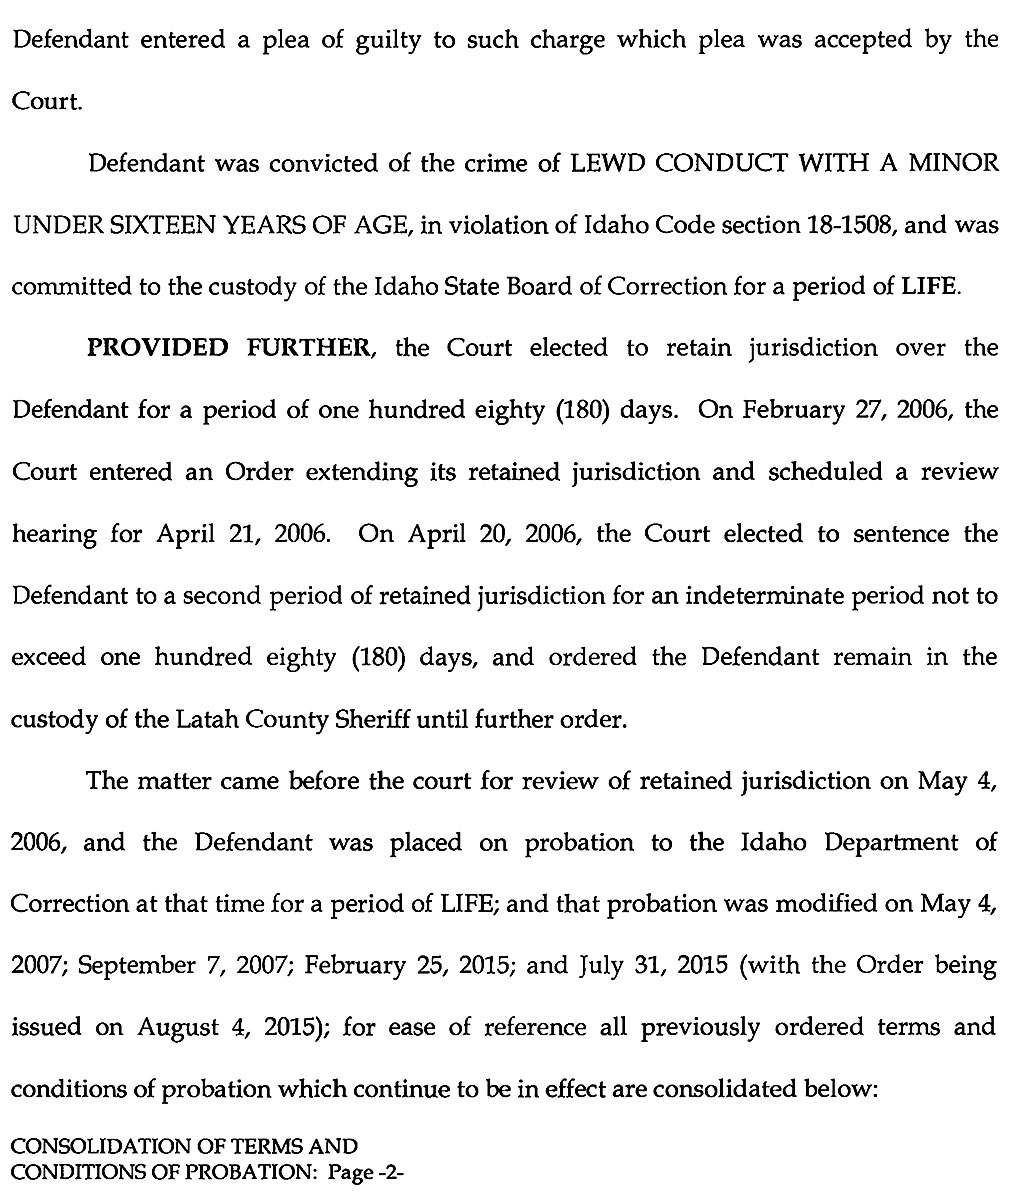 Consolidation of Terms and Conditions of Probation page 2